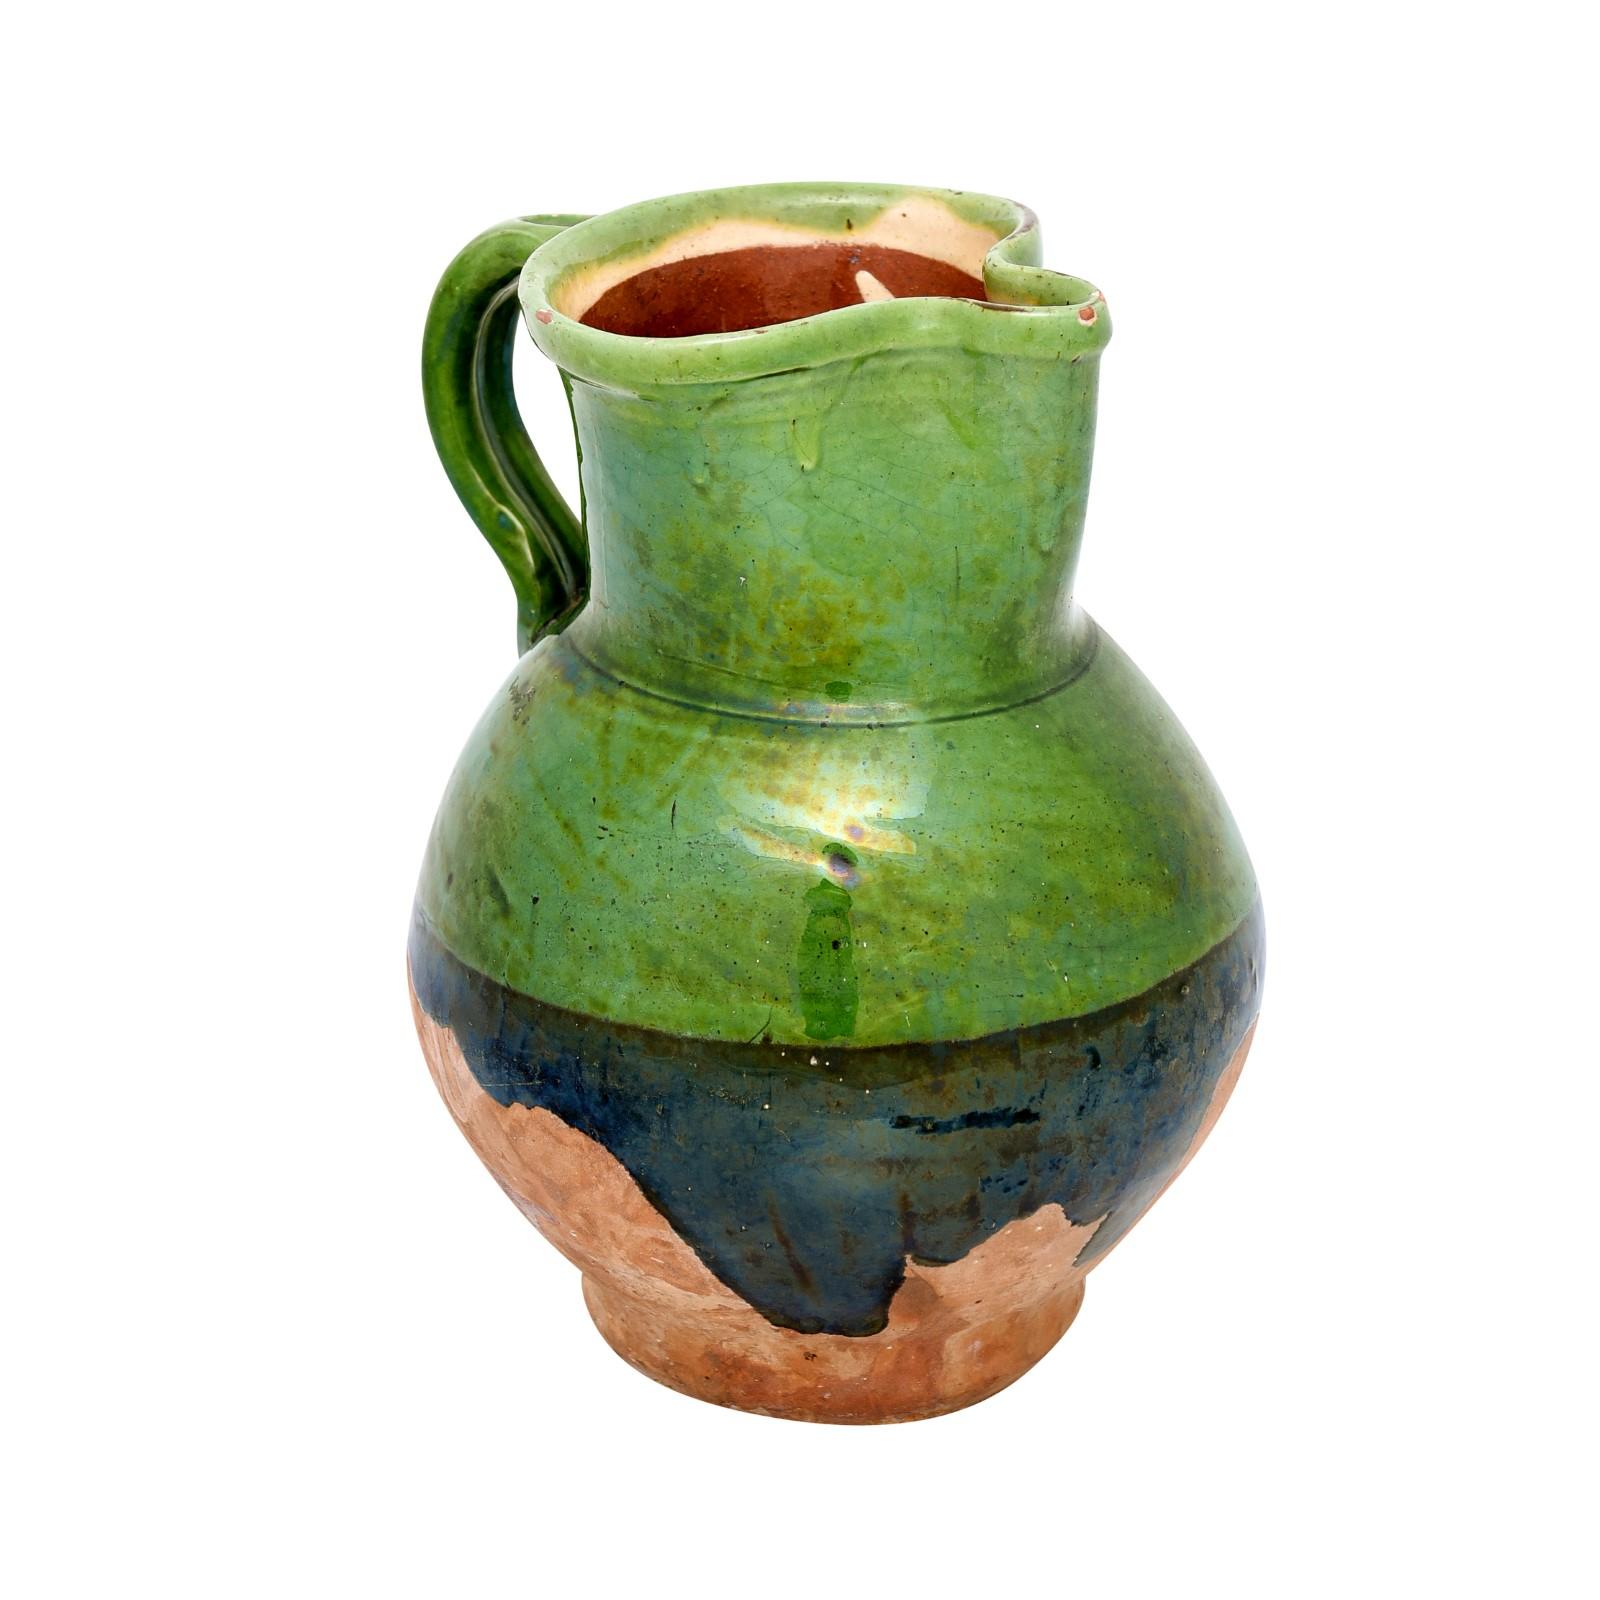 A French Provincial country pottery pitcher from the 19th century, with two toned green glaze, front spout, back handle and unglazed bottom. Created in Southern France during the 19th century, this pottery pitcher features a circular shaped top with